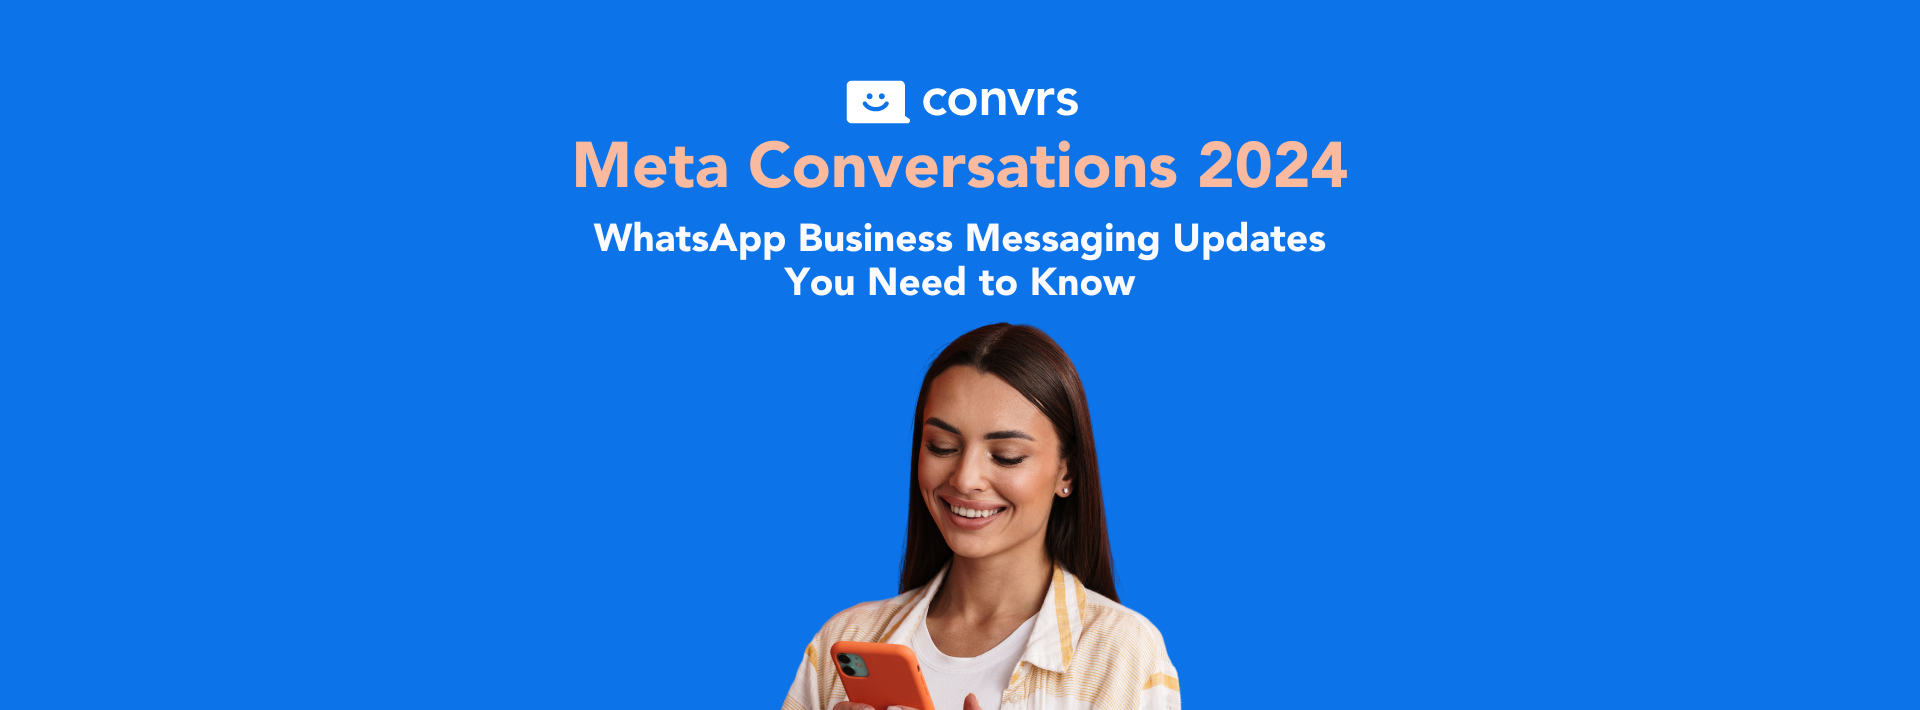 Meta Conversations 2024: WhatsApp Business Messaging Updates You Need to Know